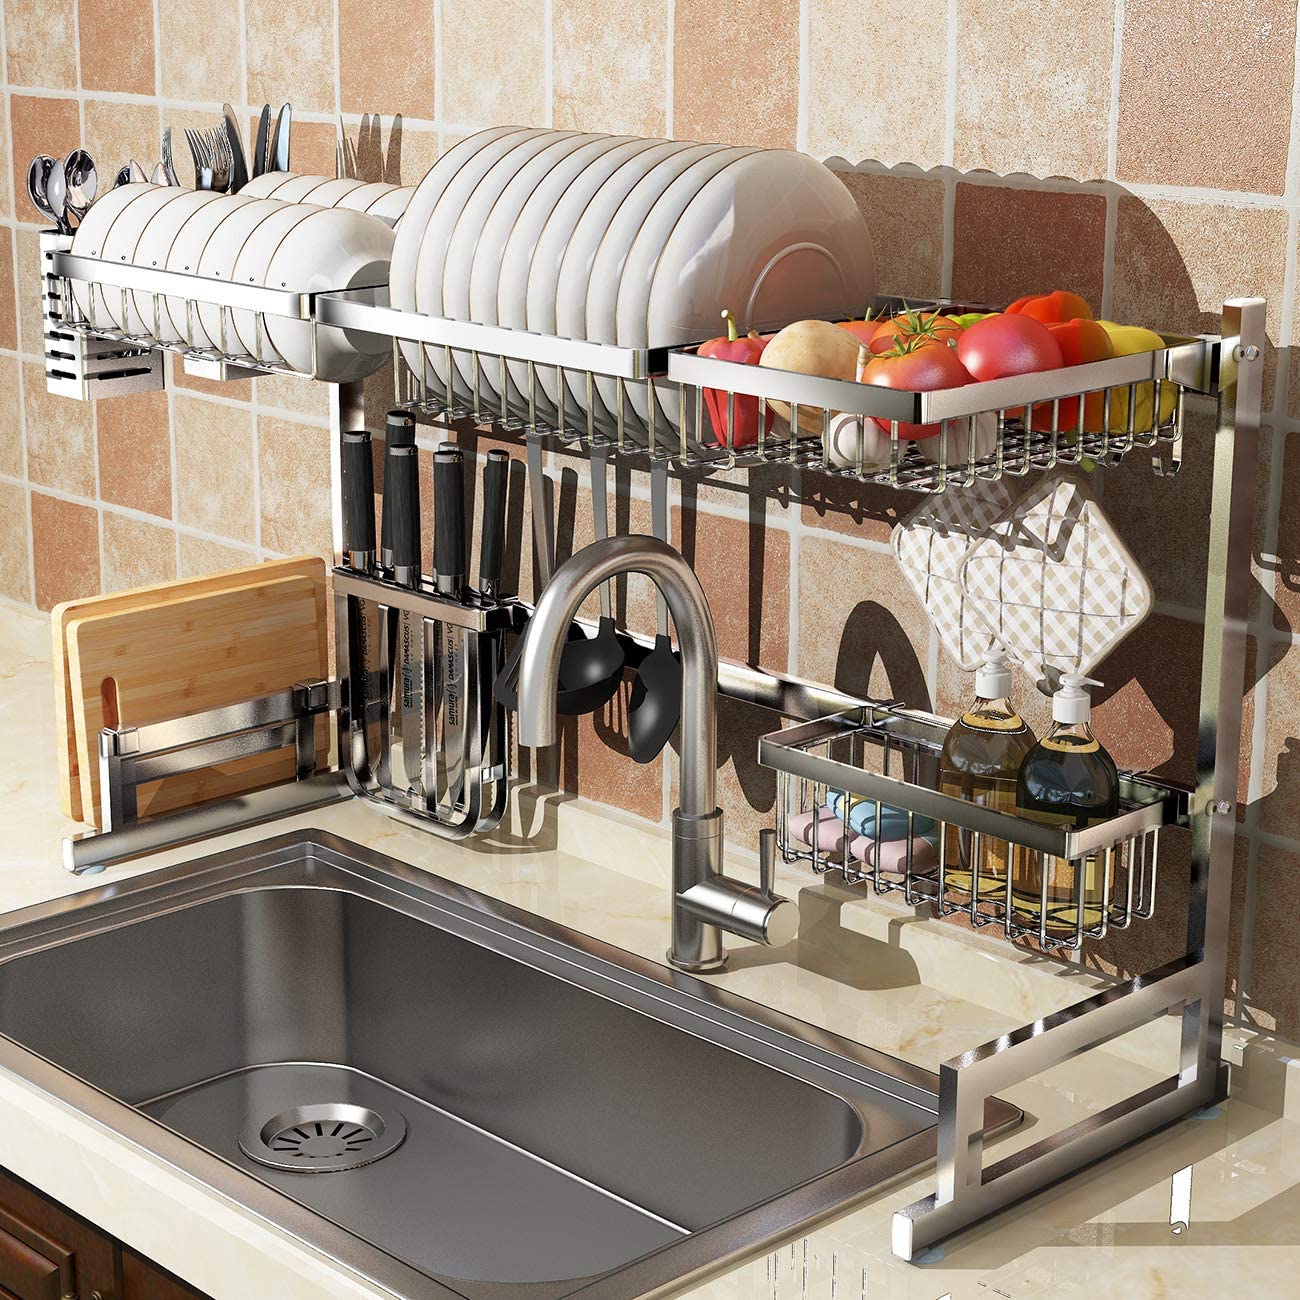 Over Sink Dish Drying Rack 2-Tier Stainless Steel Kitchen Shelf Cutlery Stainless Steel Drying Rack Over Sink